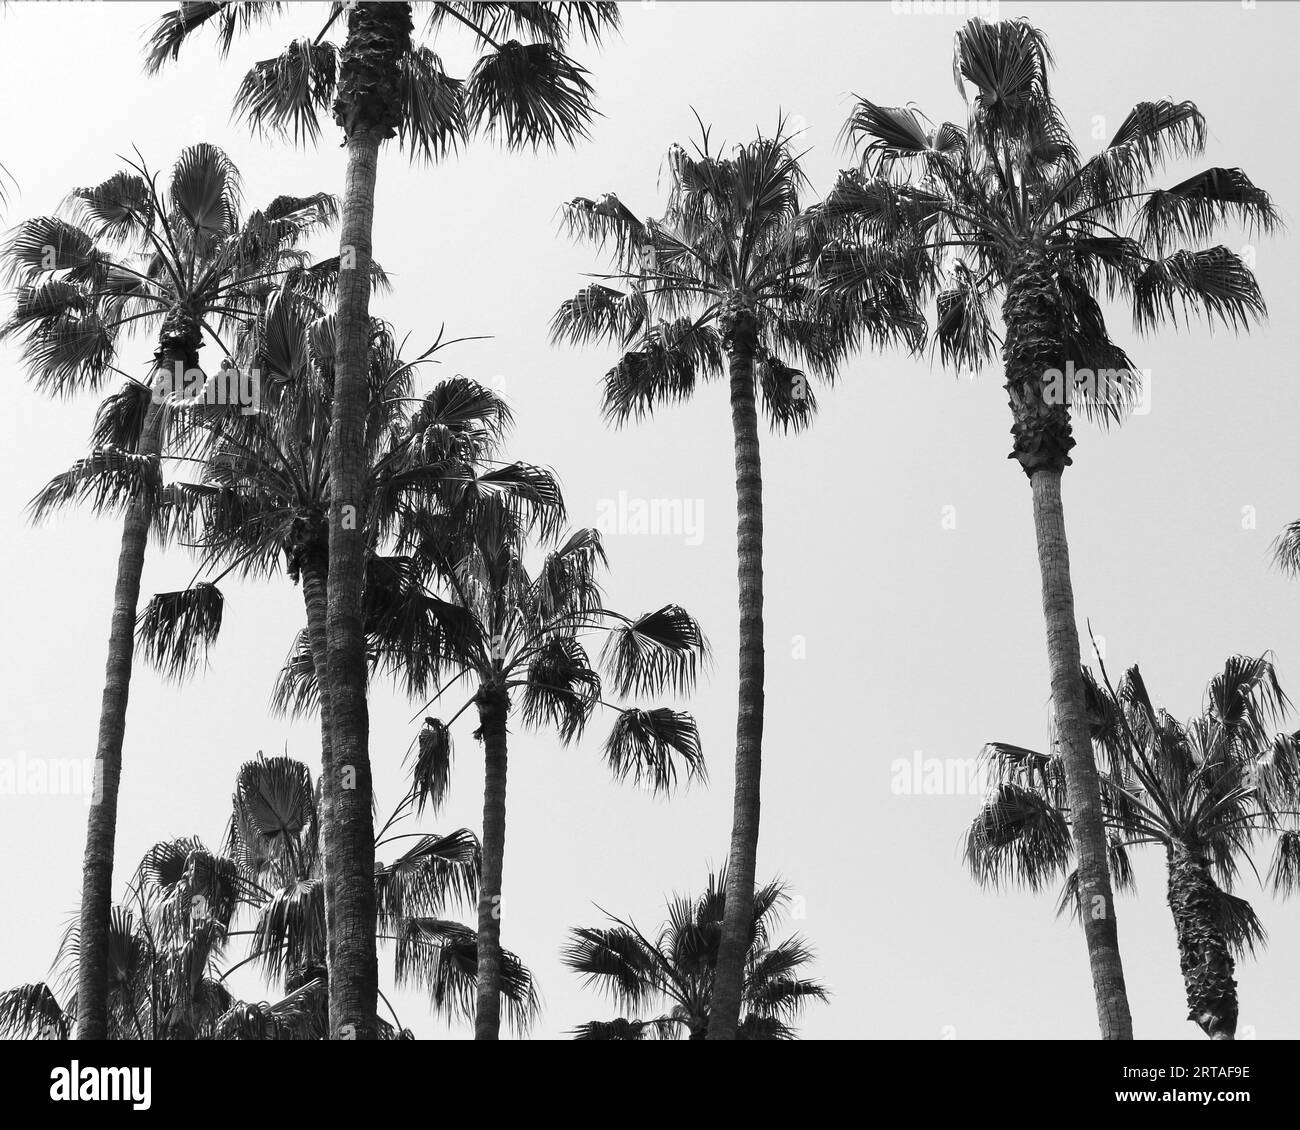 palm trees silhouettes, Palm trees with silhouette in Santa Barbara, California Stock Photo